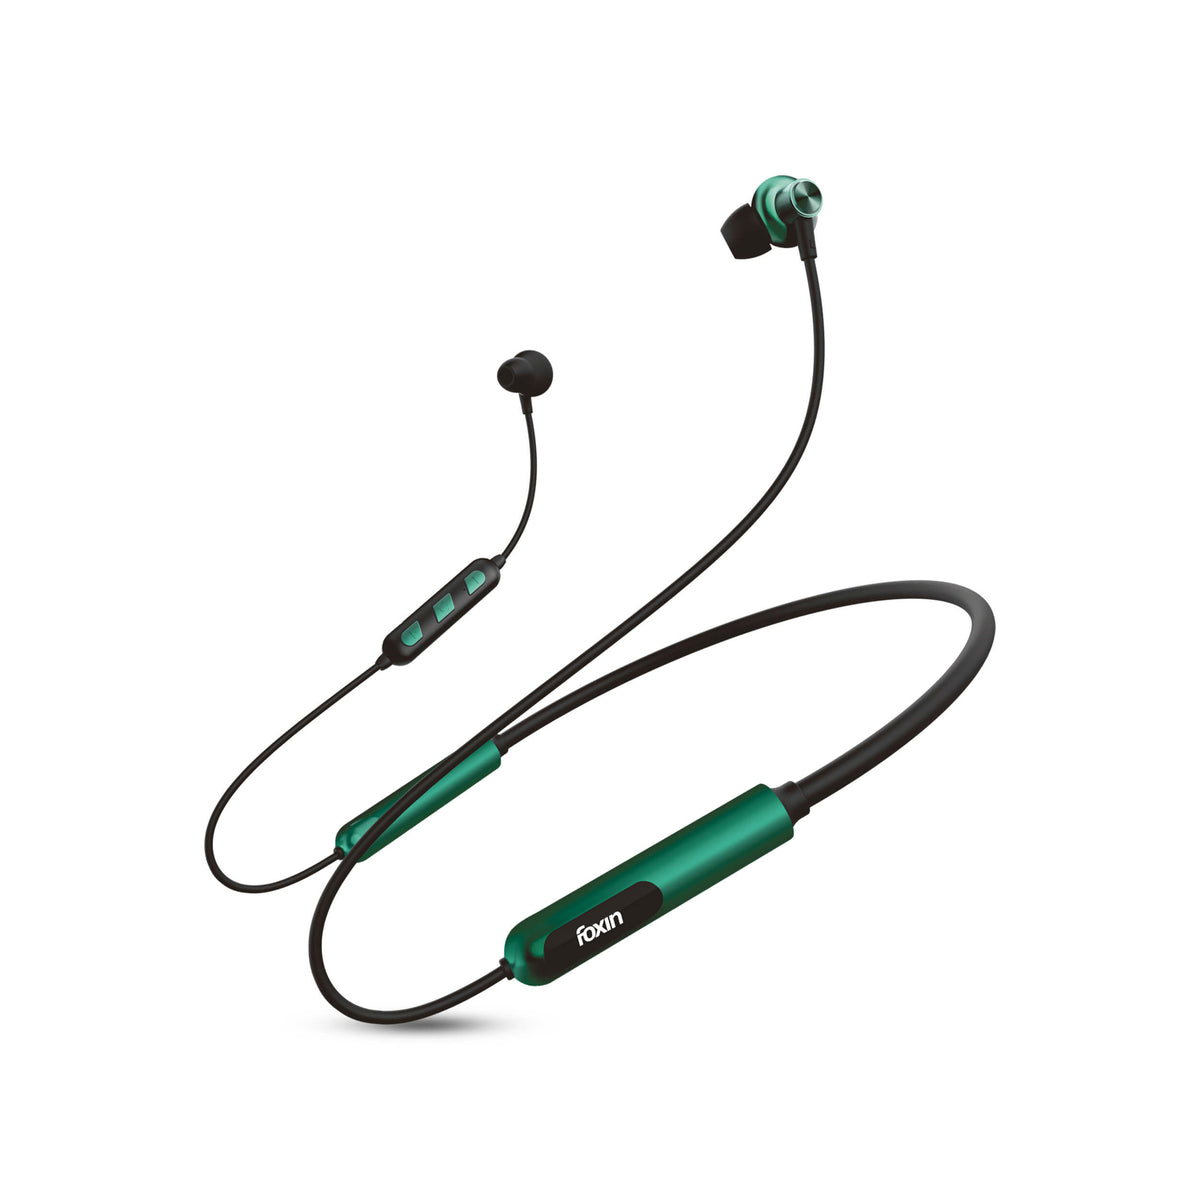 Foxin FoxBeat 210 Music Neckband Earphones | Made in India - Ideal for Music &amp; Games, 180 Days Warranty